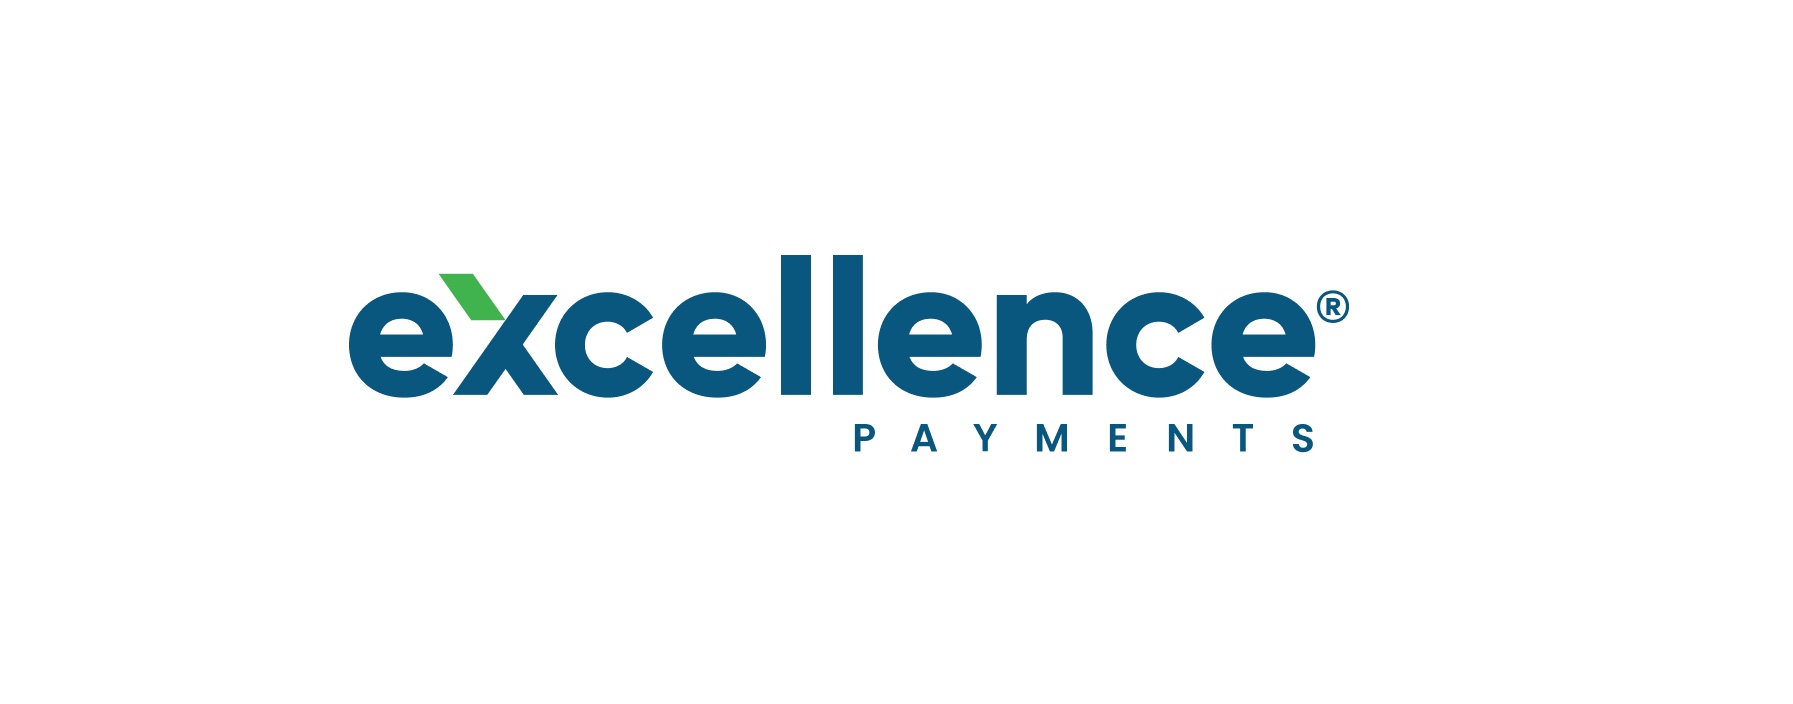 Excellence Payments is born